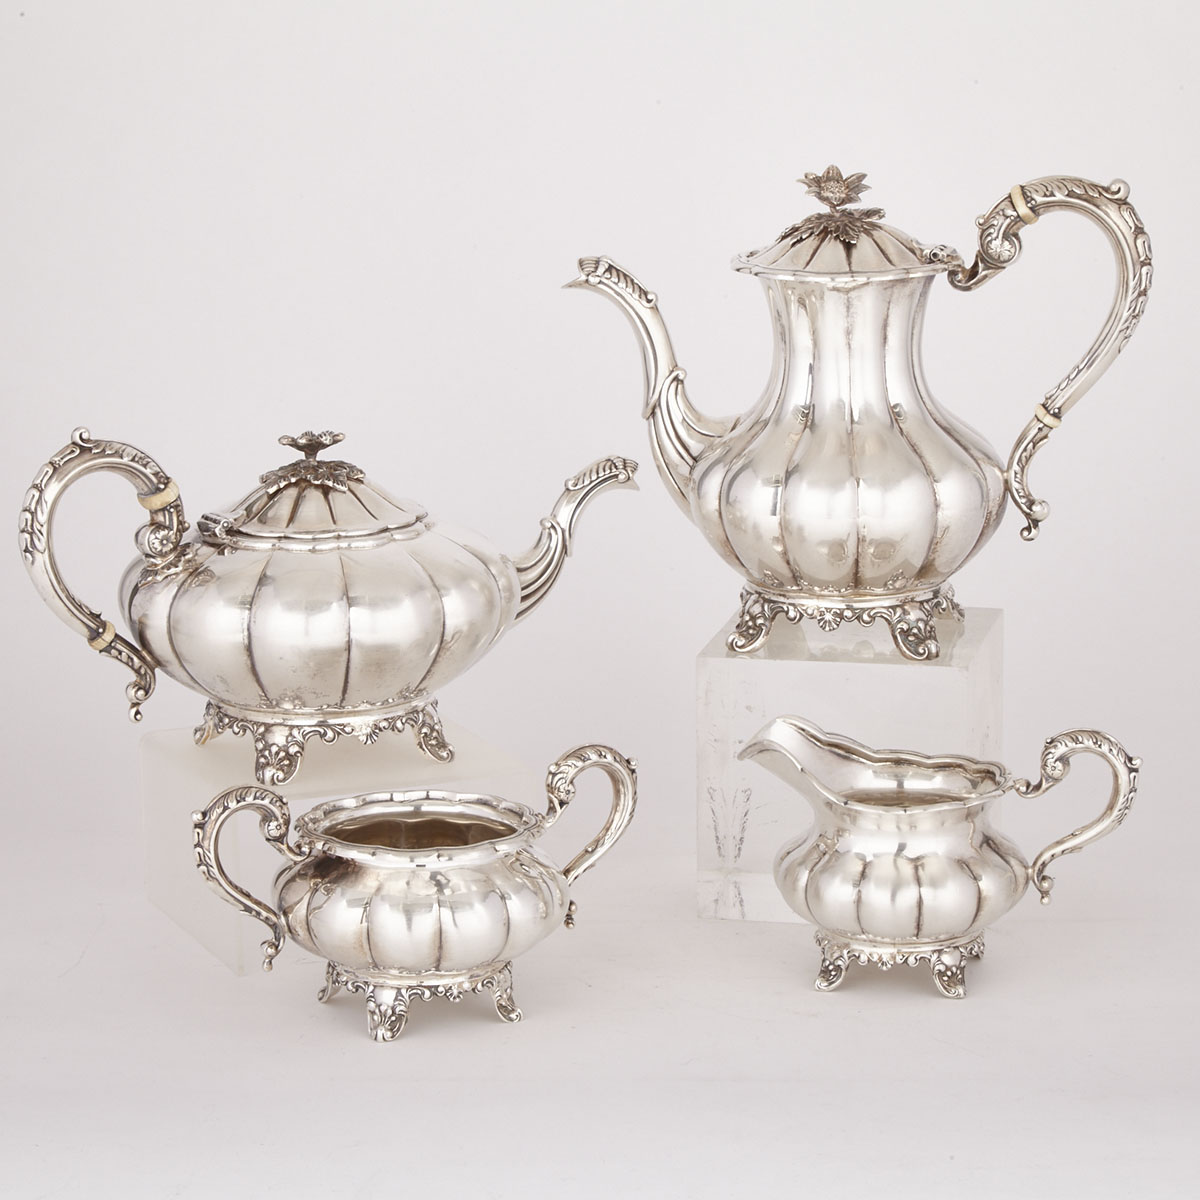 Canadian Silver Tea and Coffee Service, Henry Birks & Sons, Montreal, Que., 1948/49